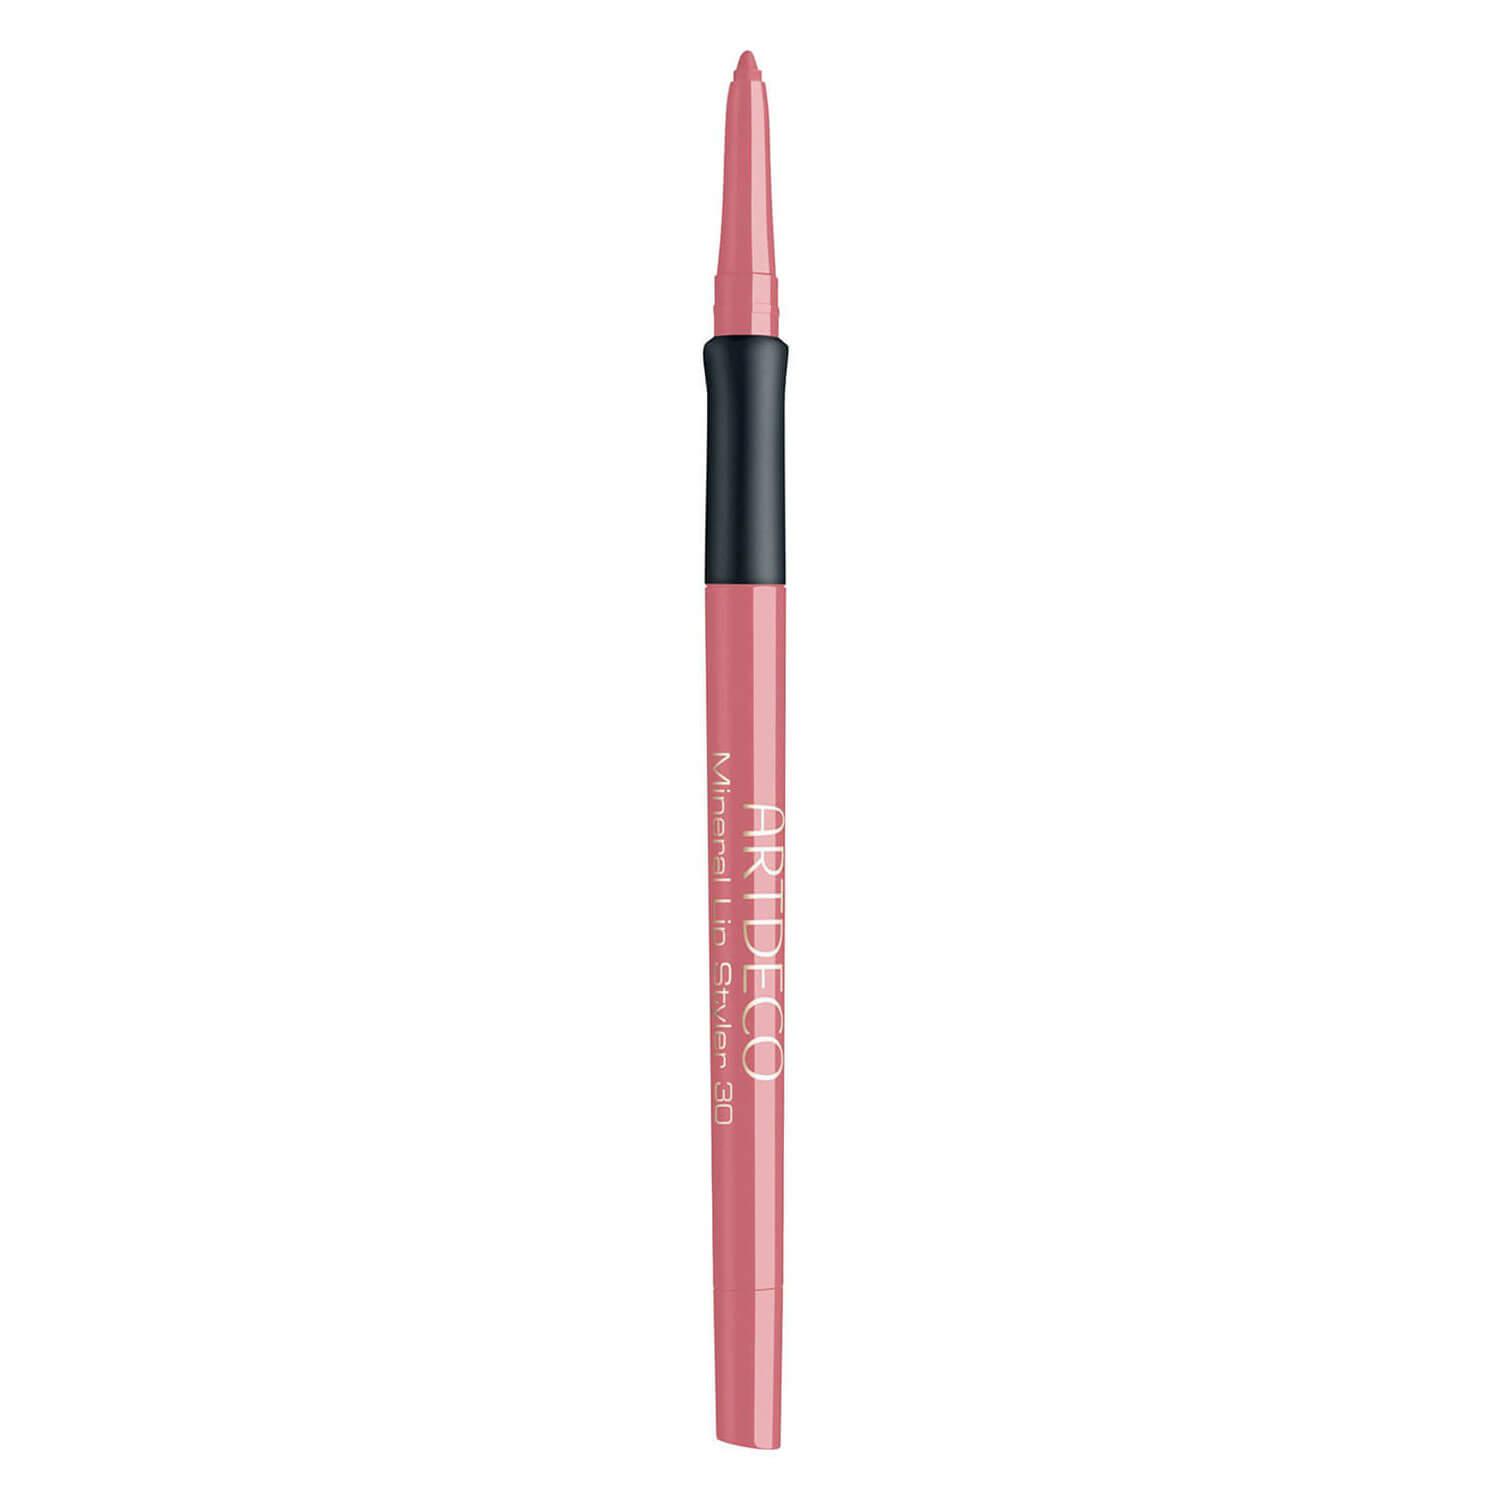 Mineral Lip Styler - Mineral Flowerbed 30